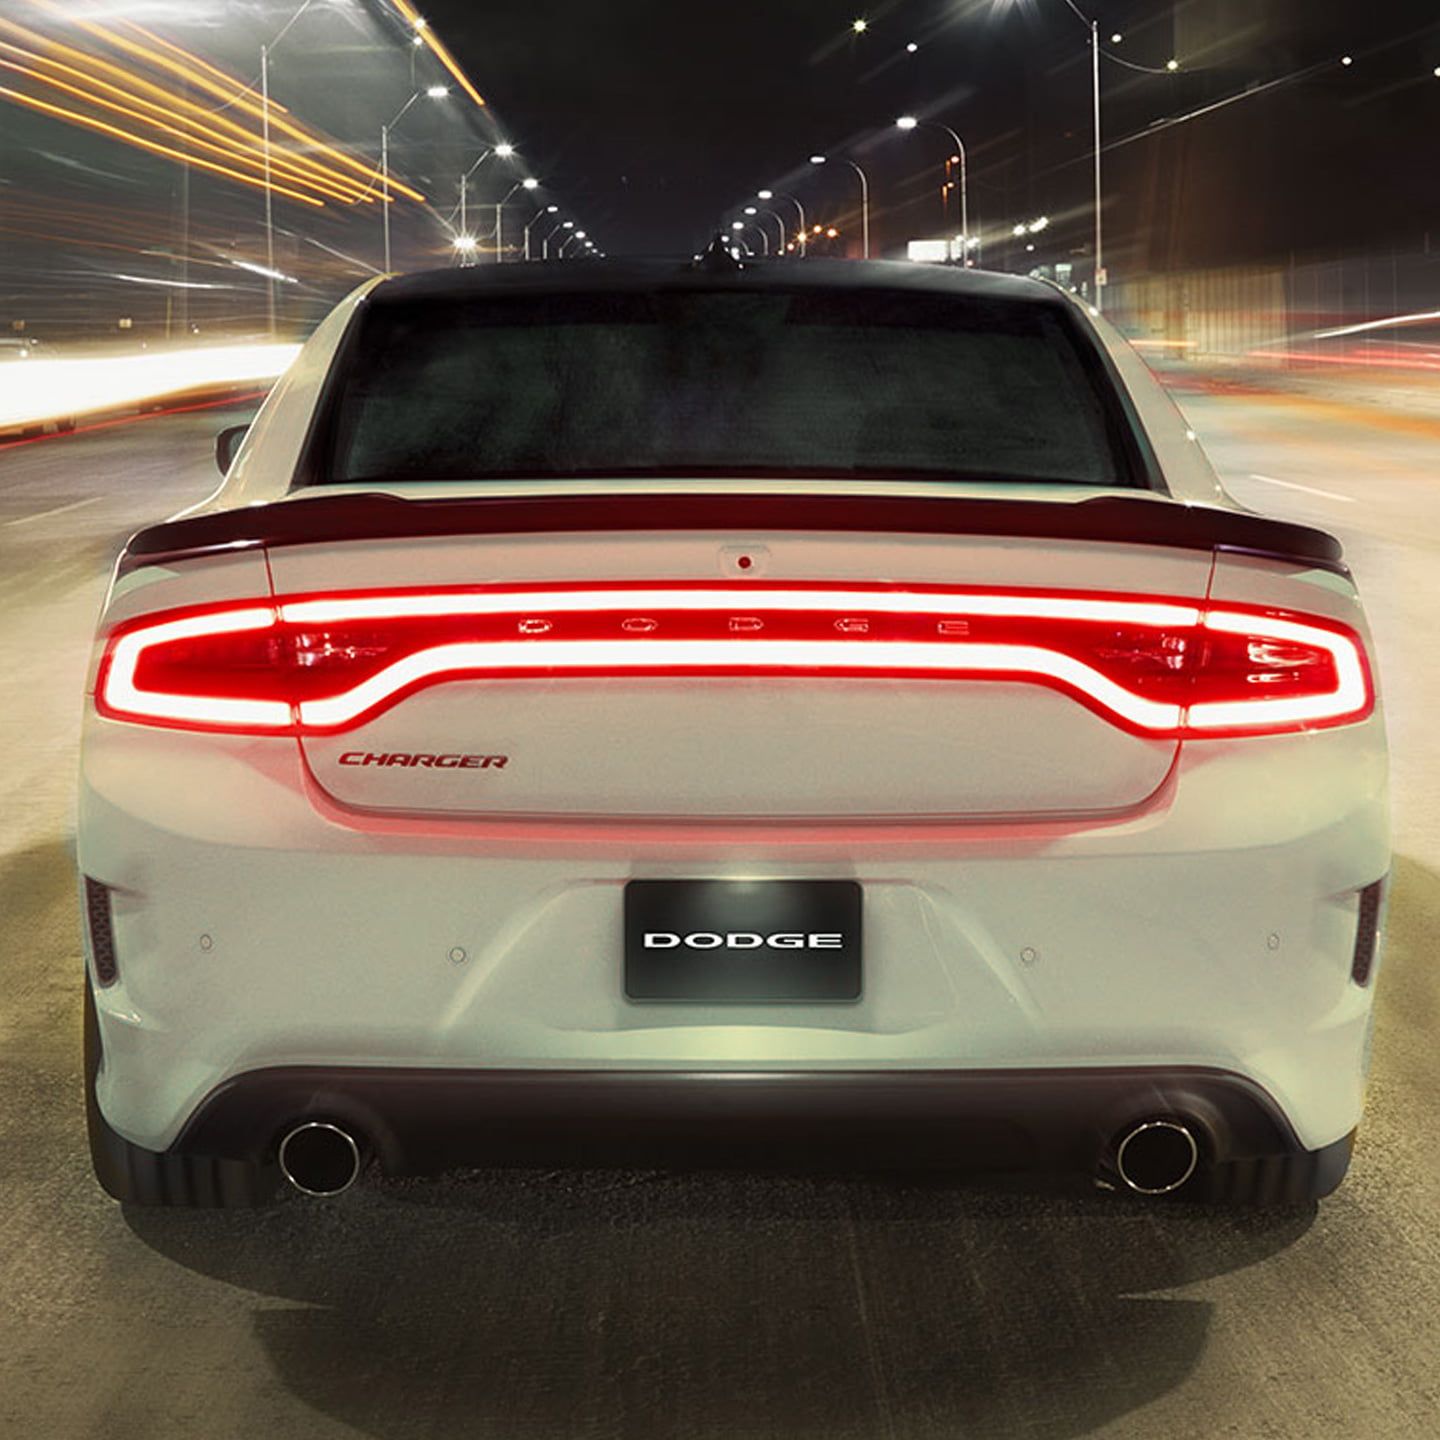 2019-Dodge-Charger-LED-racetrack-taillamps-Agt-Europe.jpg